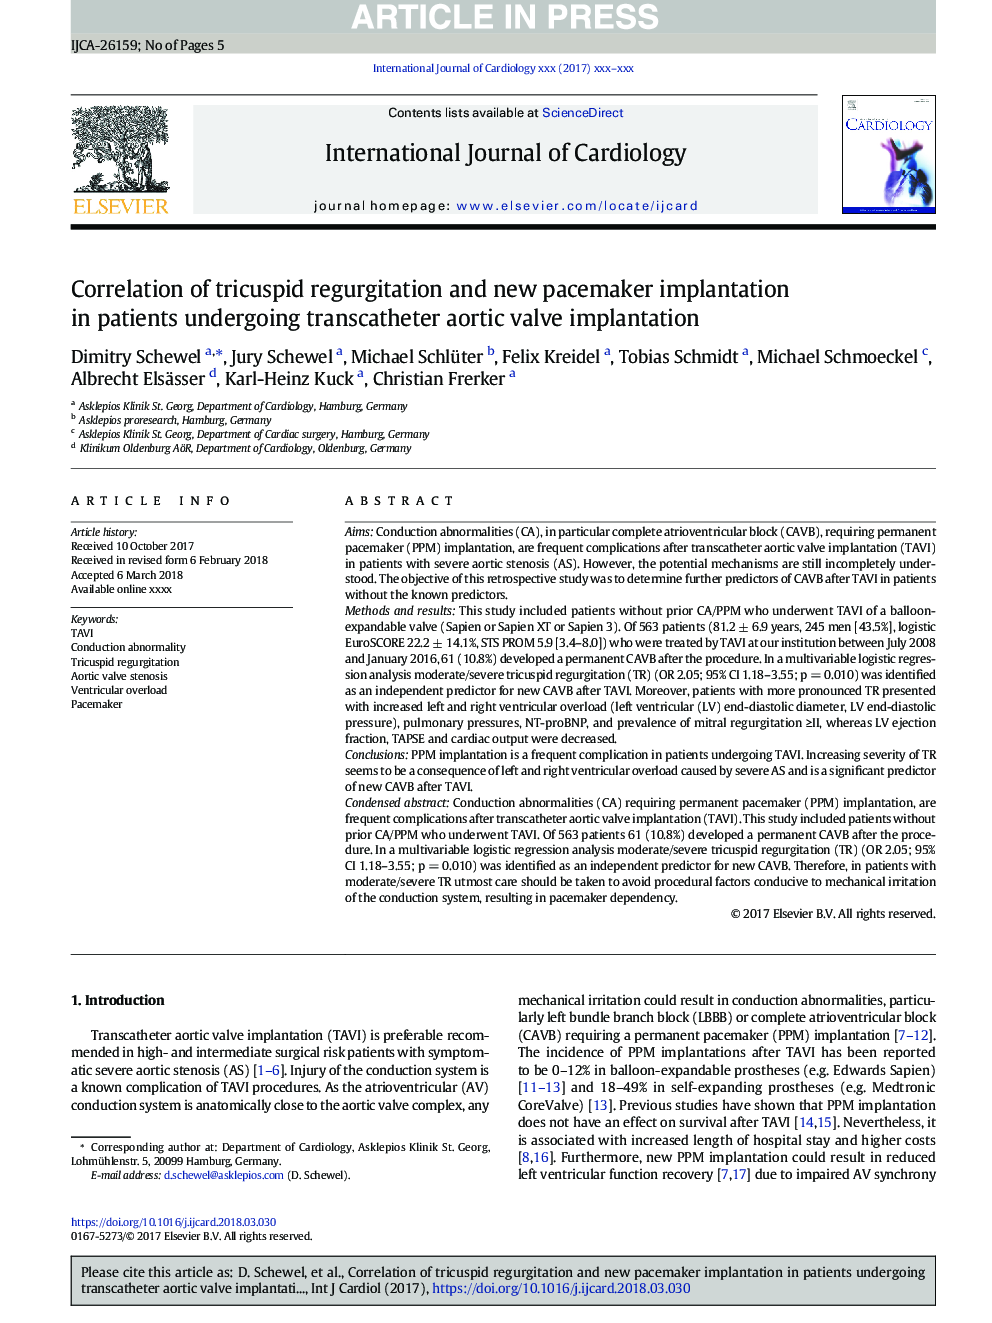 Correlation of tricuspid regurgitation and new pacemaker implantation in patients undergoing transcatheter aortic valve implantation